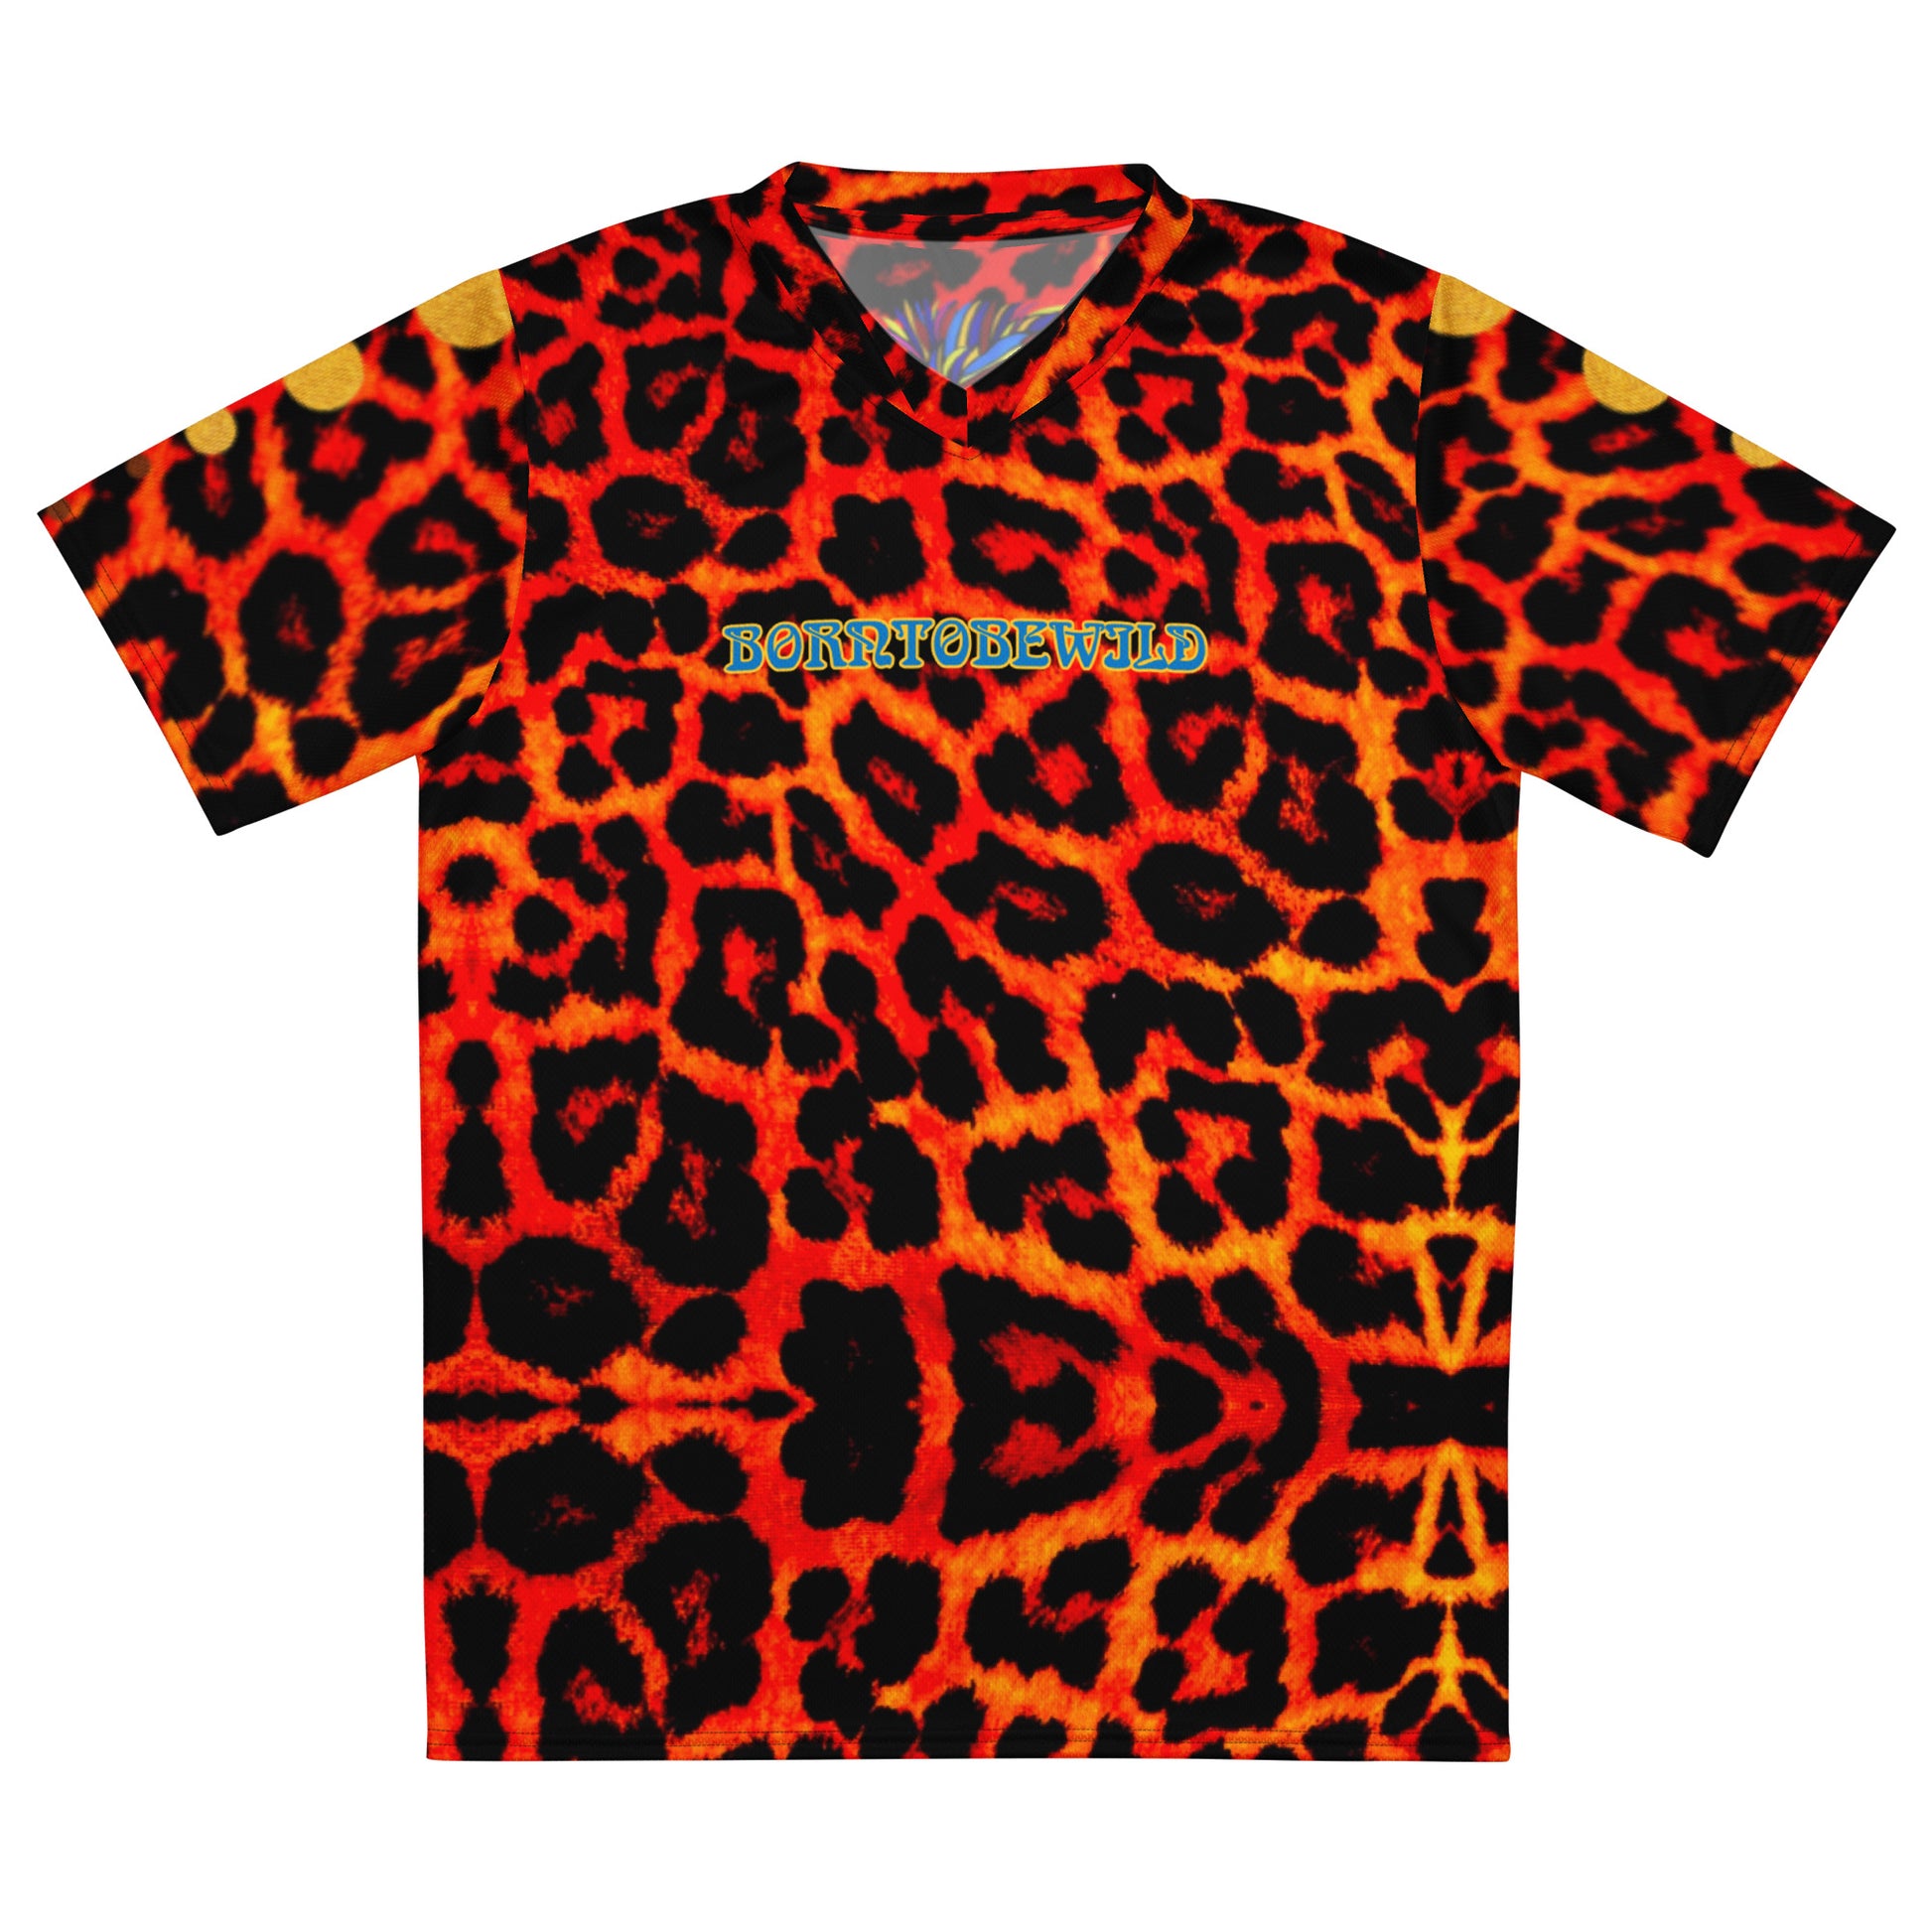 Jersey Top Born to be Wild on Blazing Cheetah Pattern - DMD Bags